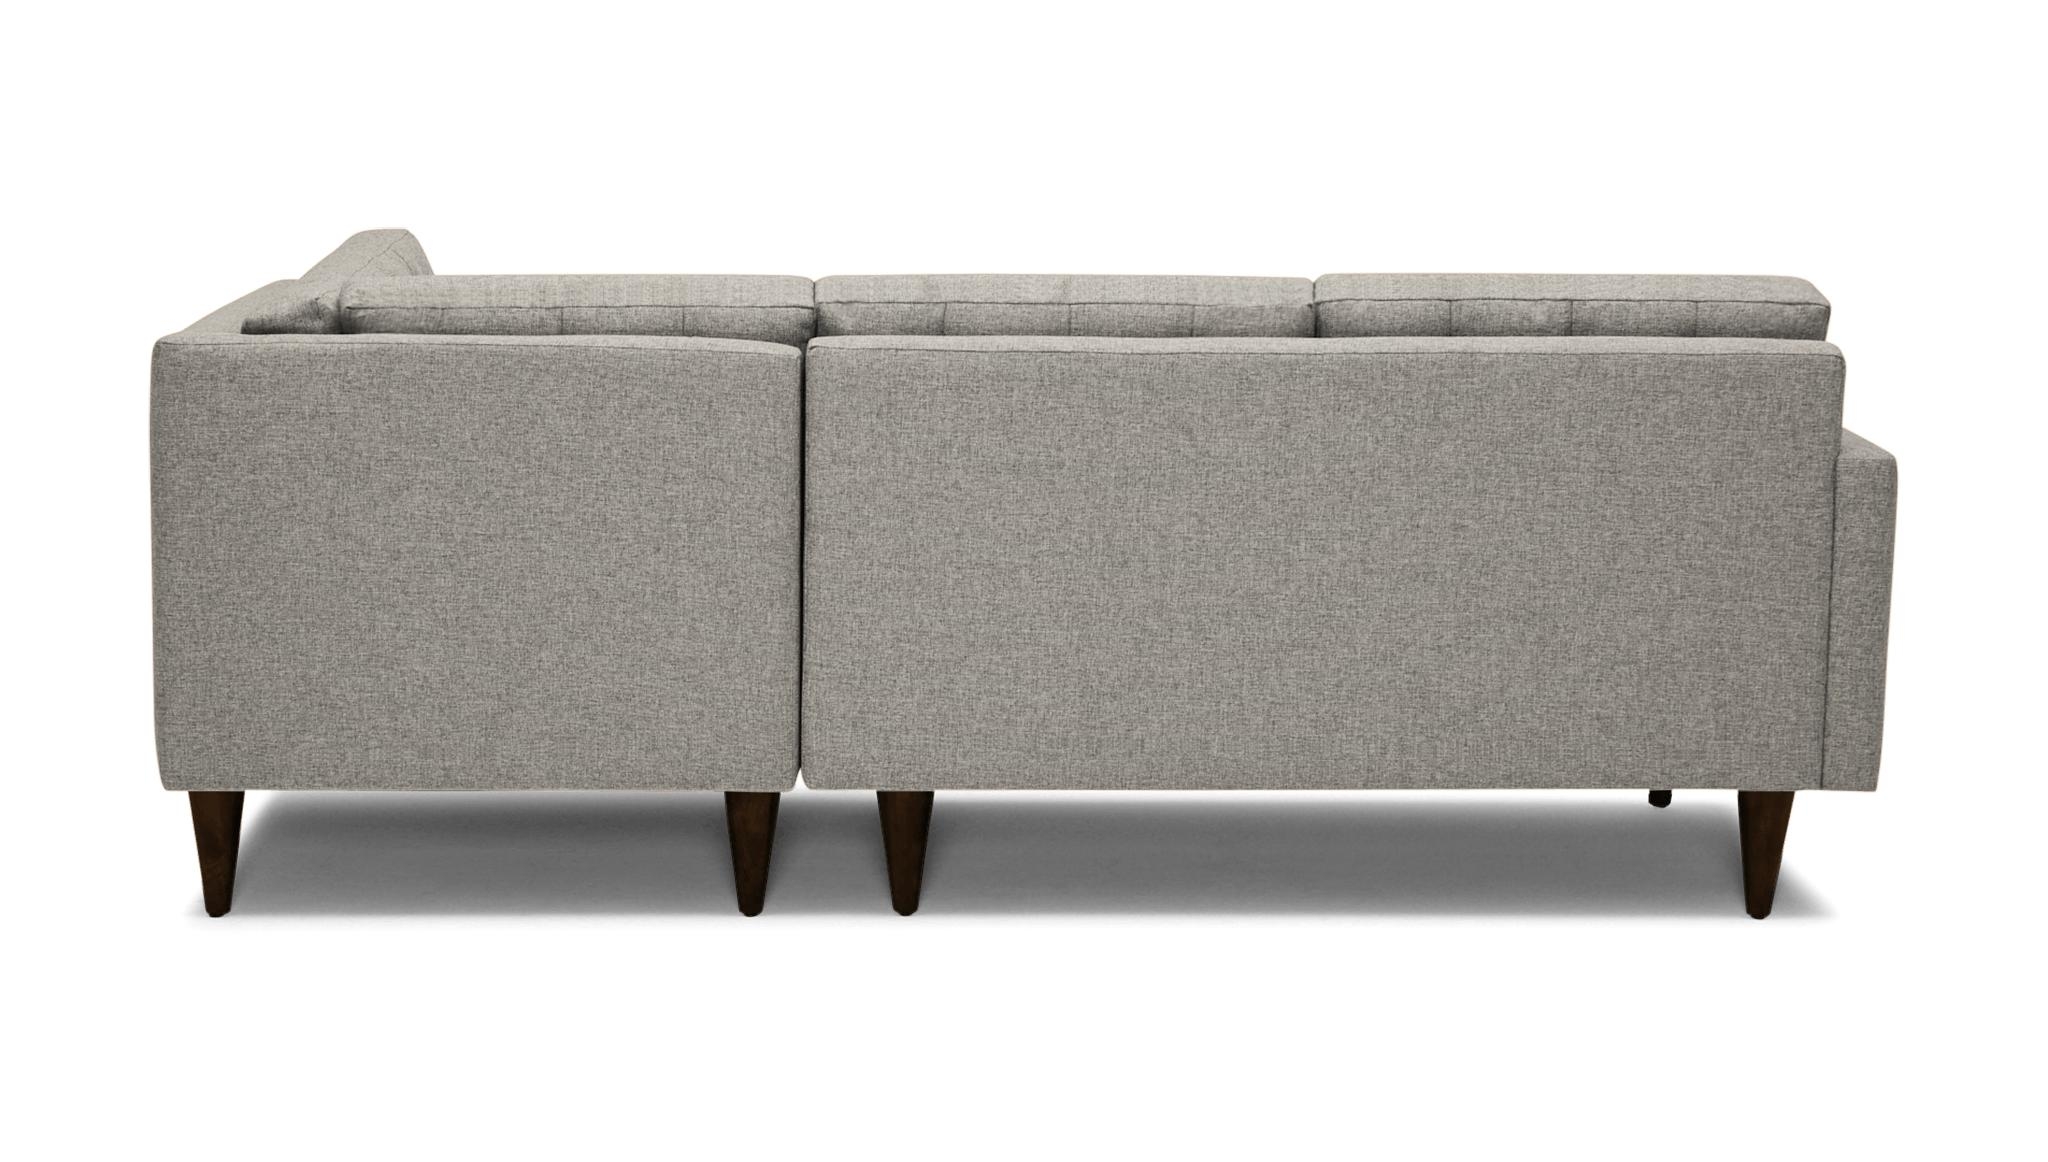 White Eliot Mid Century Modern Apartment Sectional with Bumper - Bloke Cotton - Mocha - Right  - Image 4